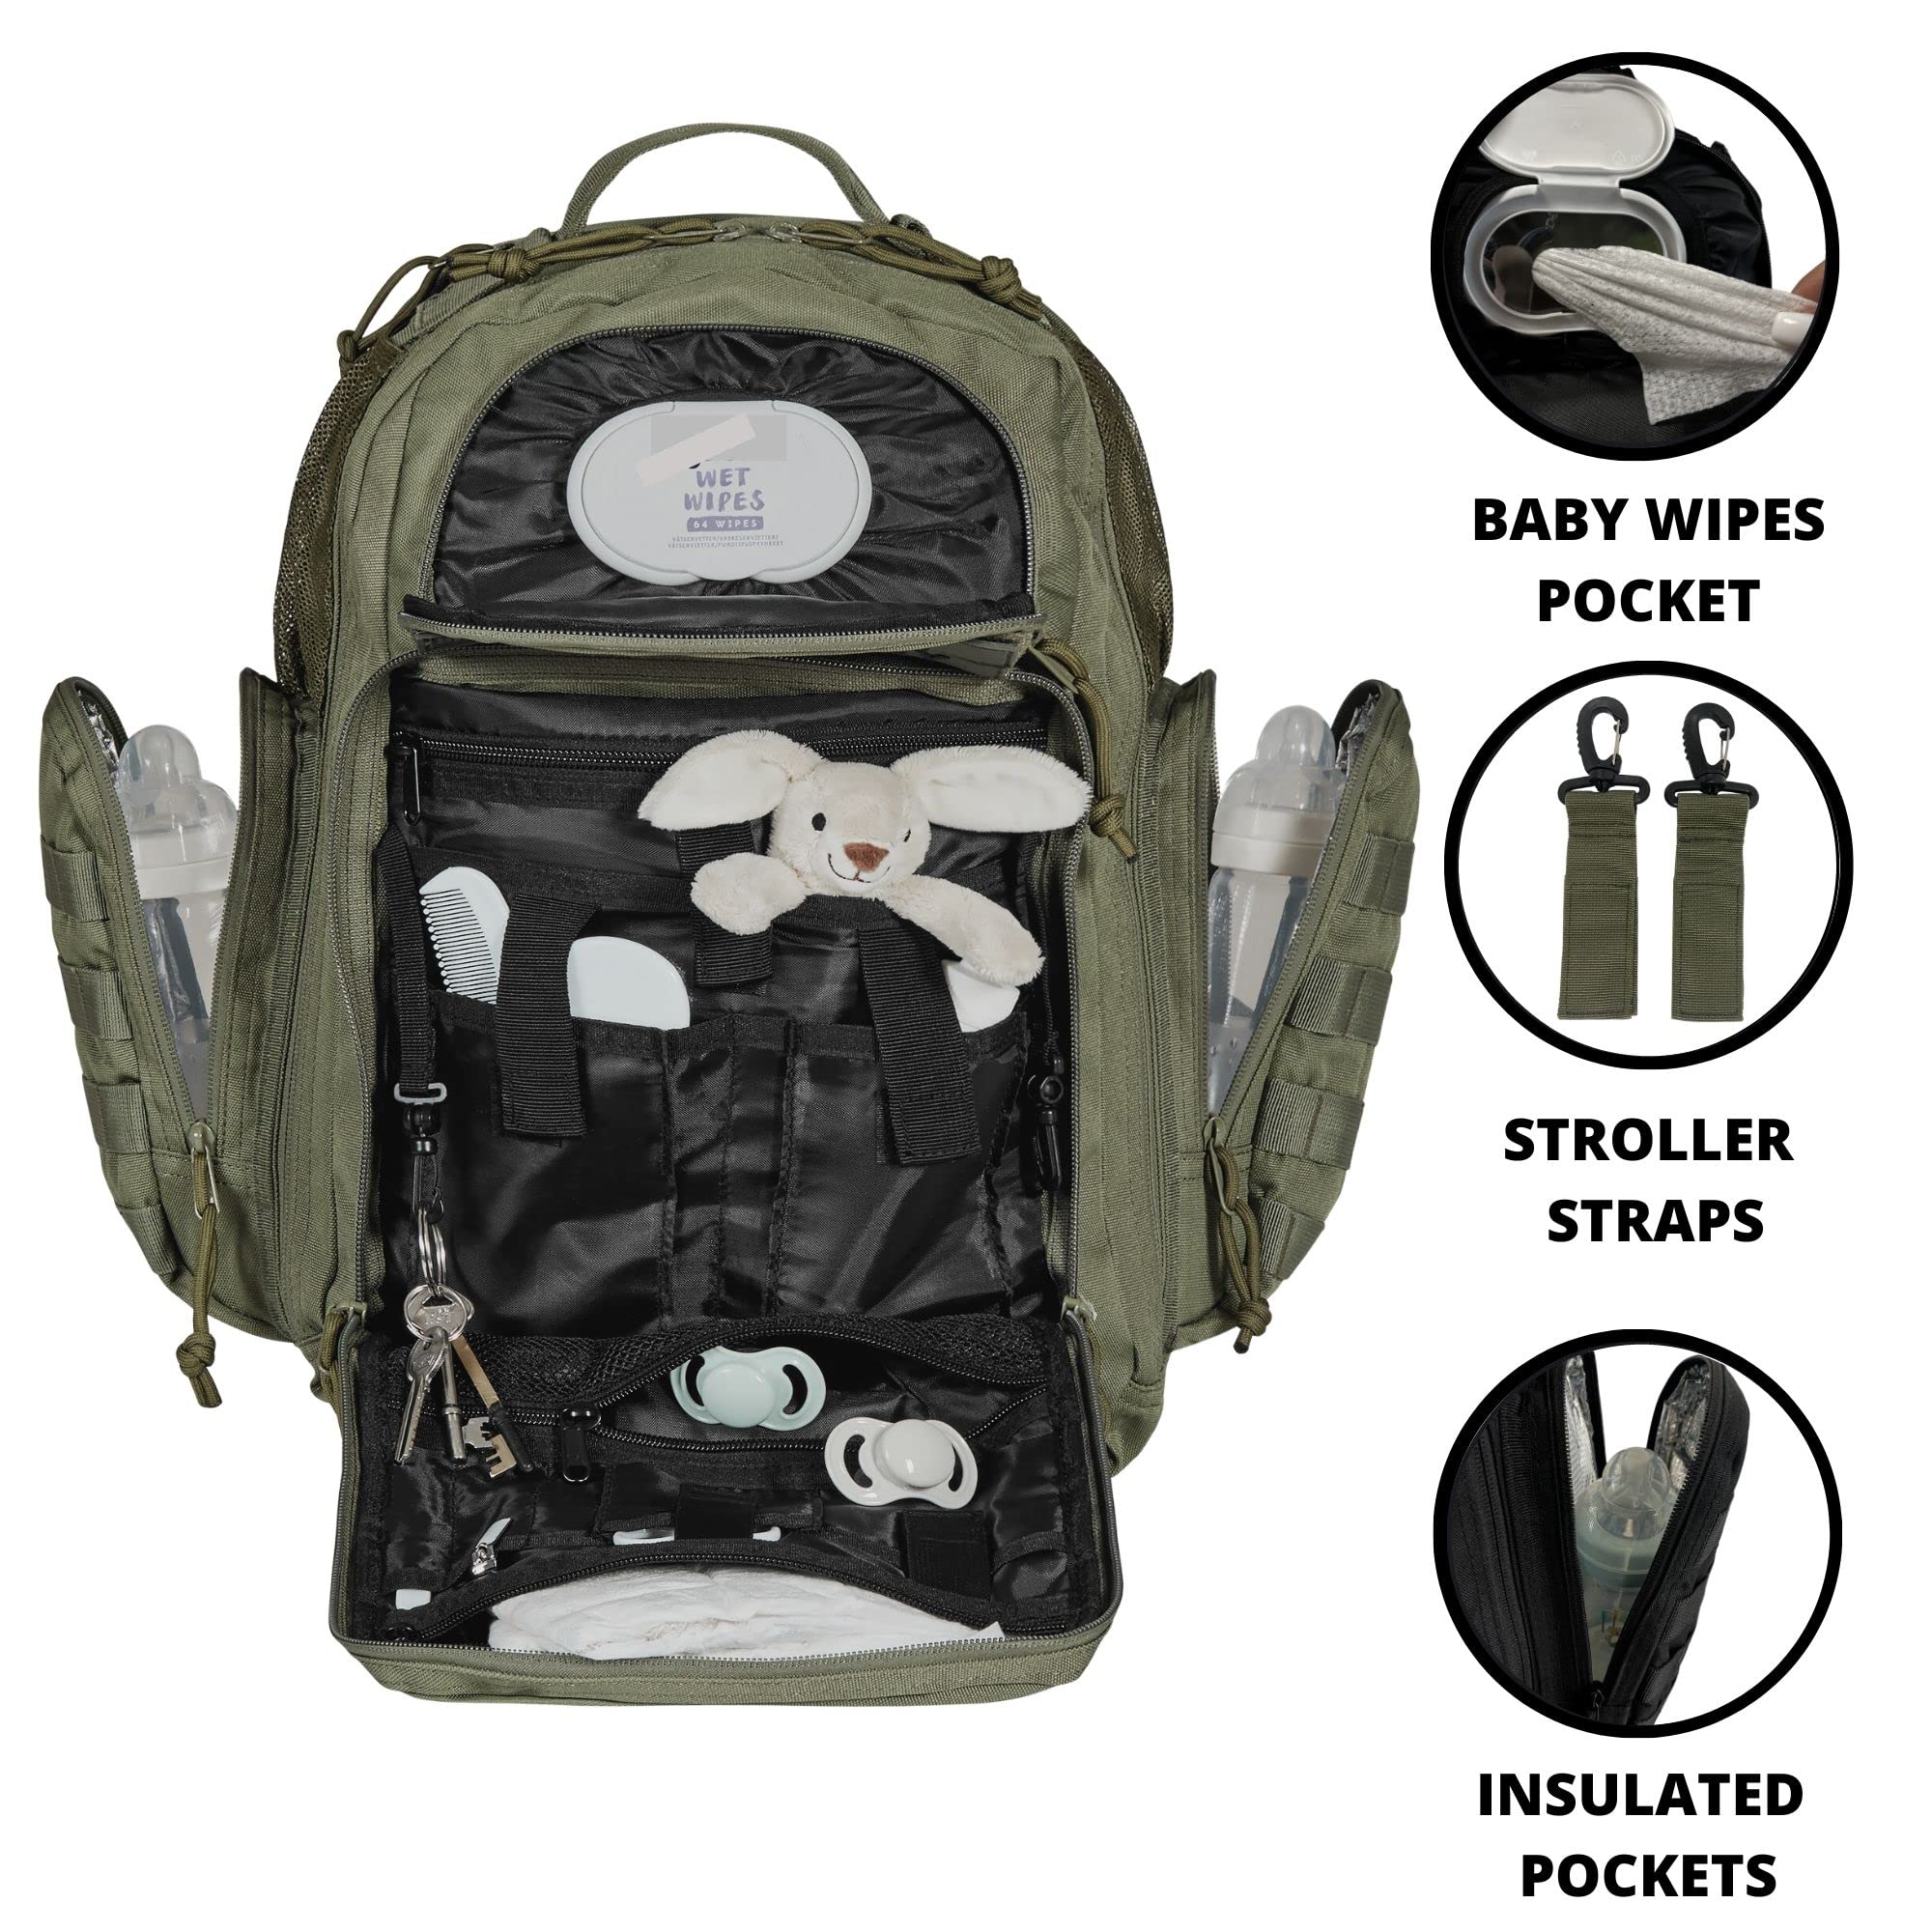 Phil & Jack Dad Diaper Bag Backpack, Baby Diaper Bag with Changing Station, Tactical Military Style, Womens Mens Diaper Bag (Military Green)